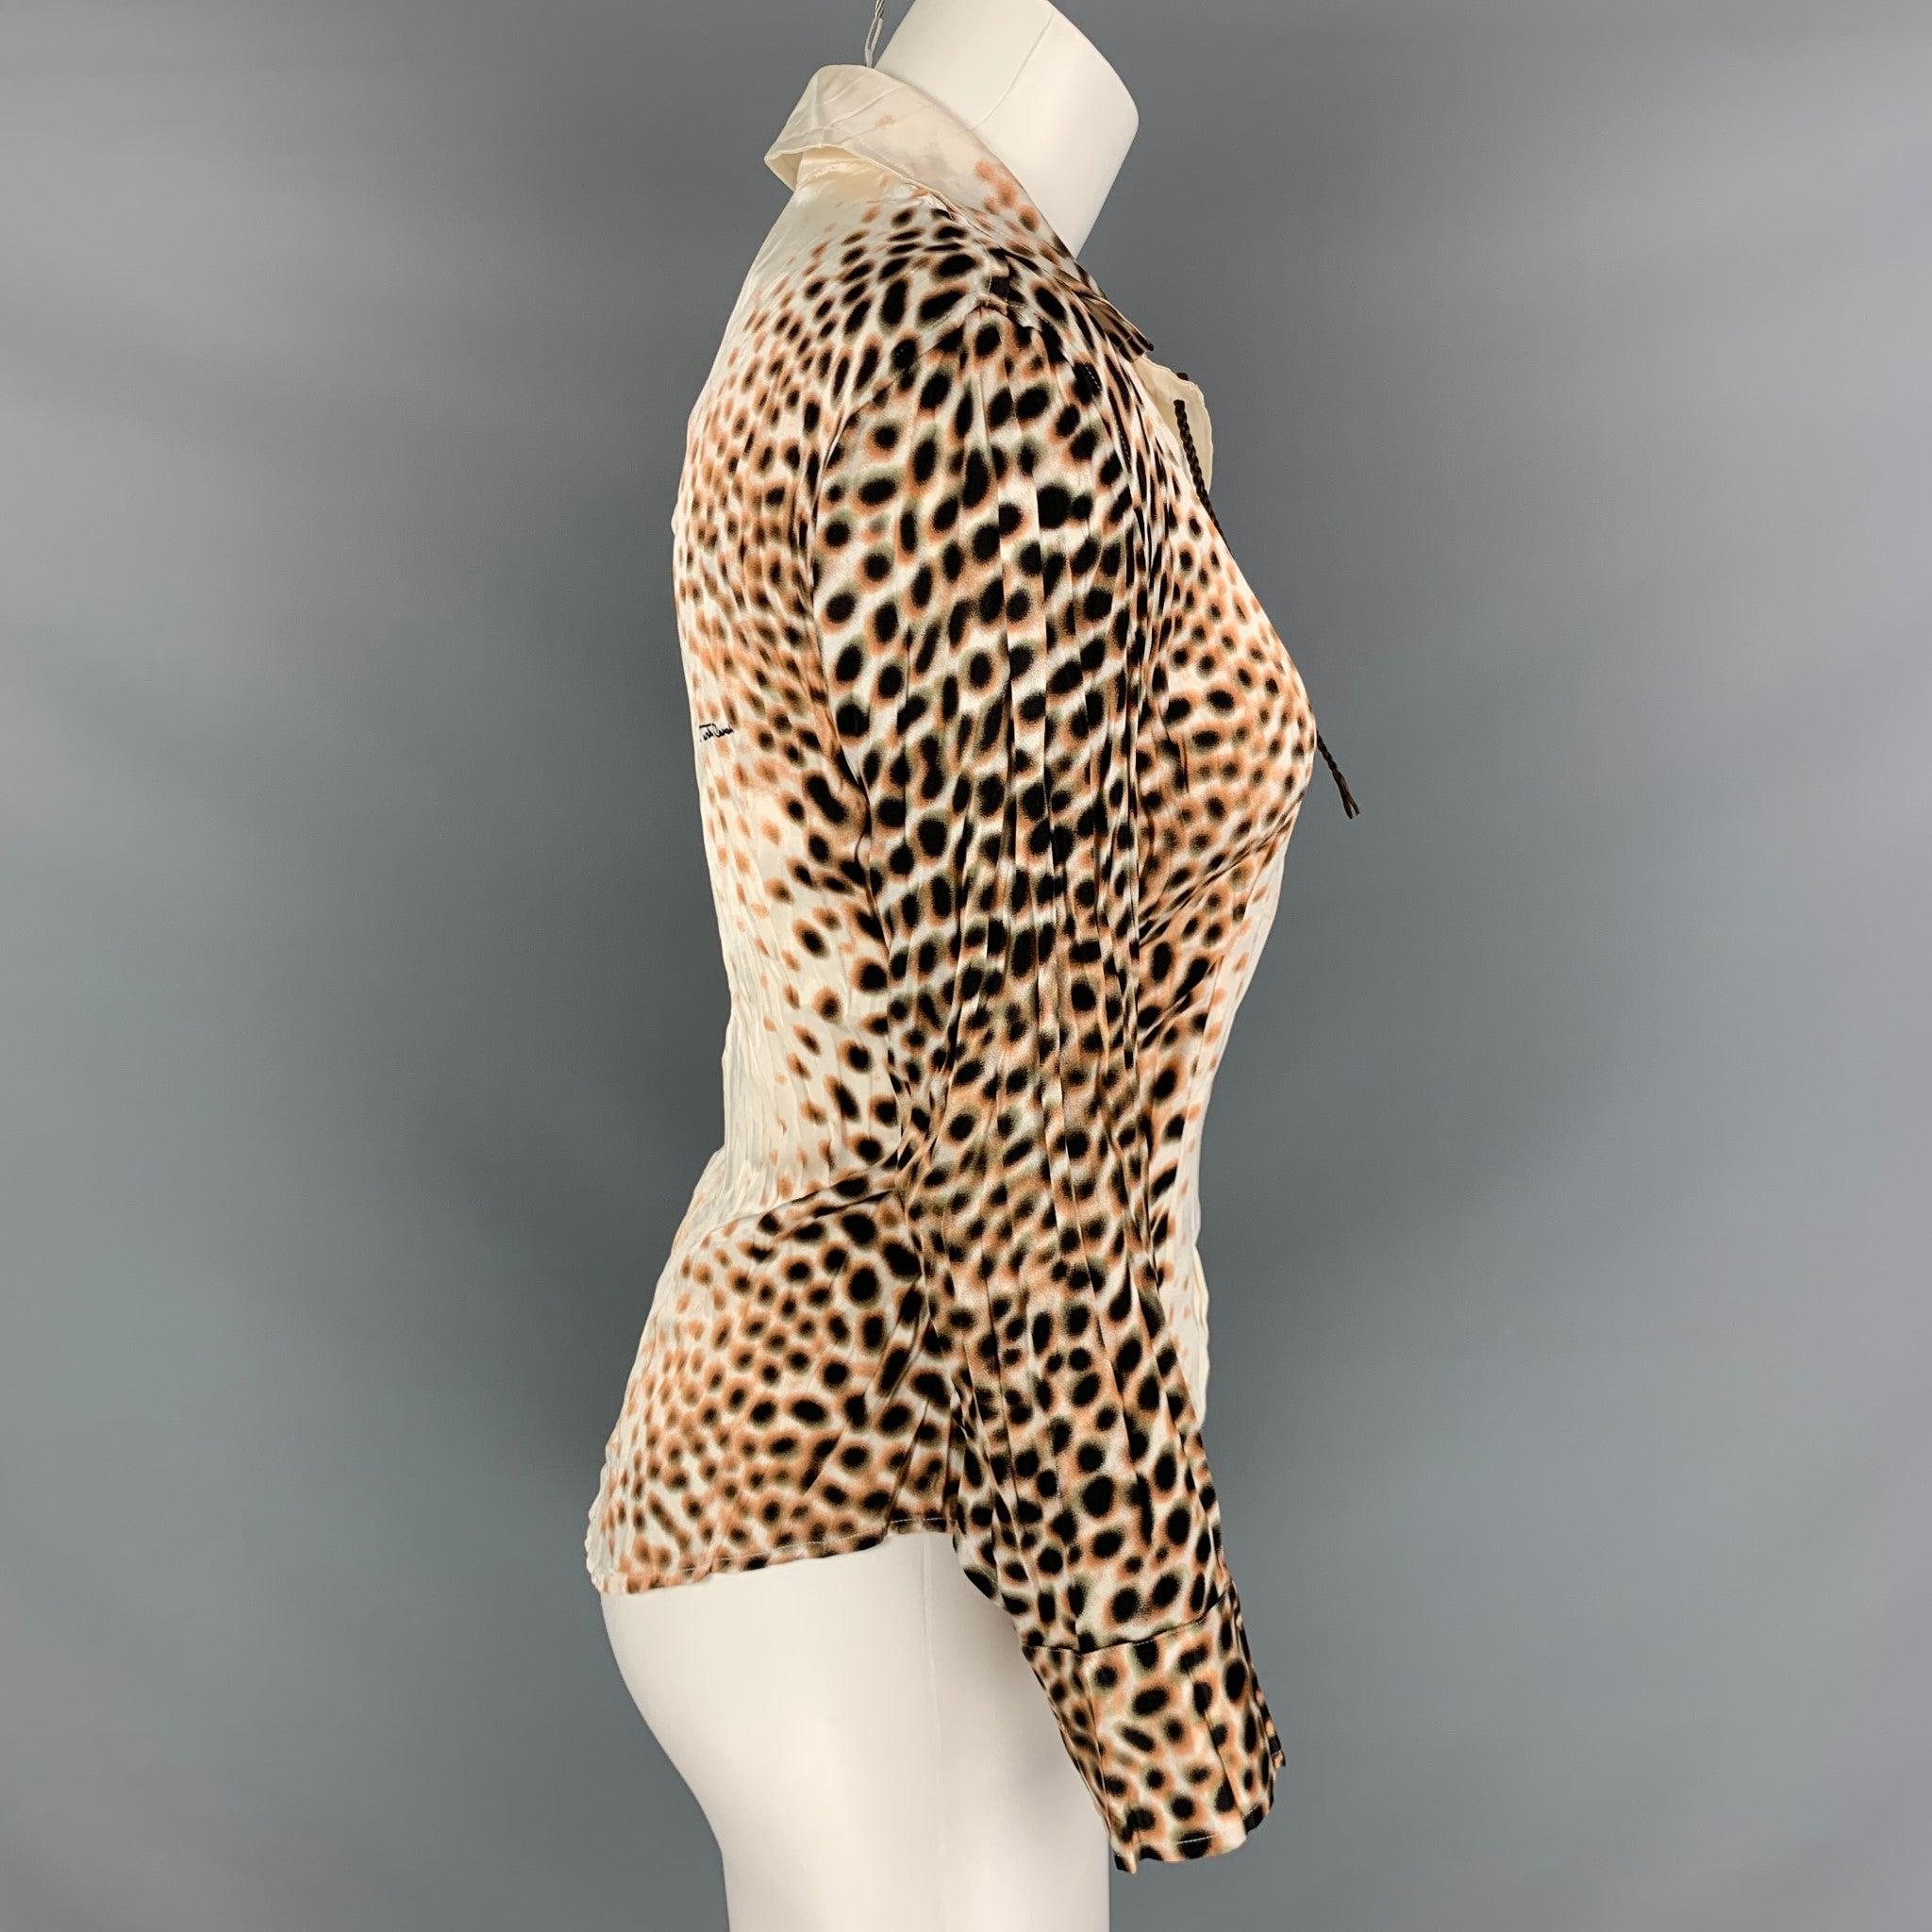 ROBERTO CAVALLI long sleeves shirt comes in brown and white silk woven material features an animal print style, and leather tie closure at center front. Made in Italy.Excellent Pre-Owned Condition.Marke: S 

Measurements: 
 
Shoulder: 16 inches